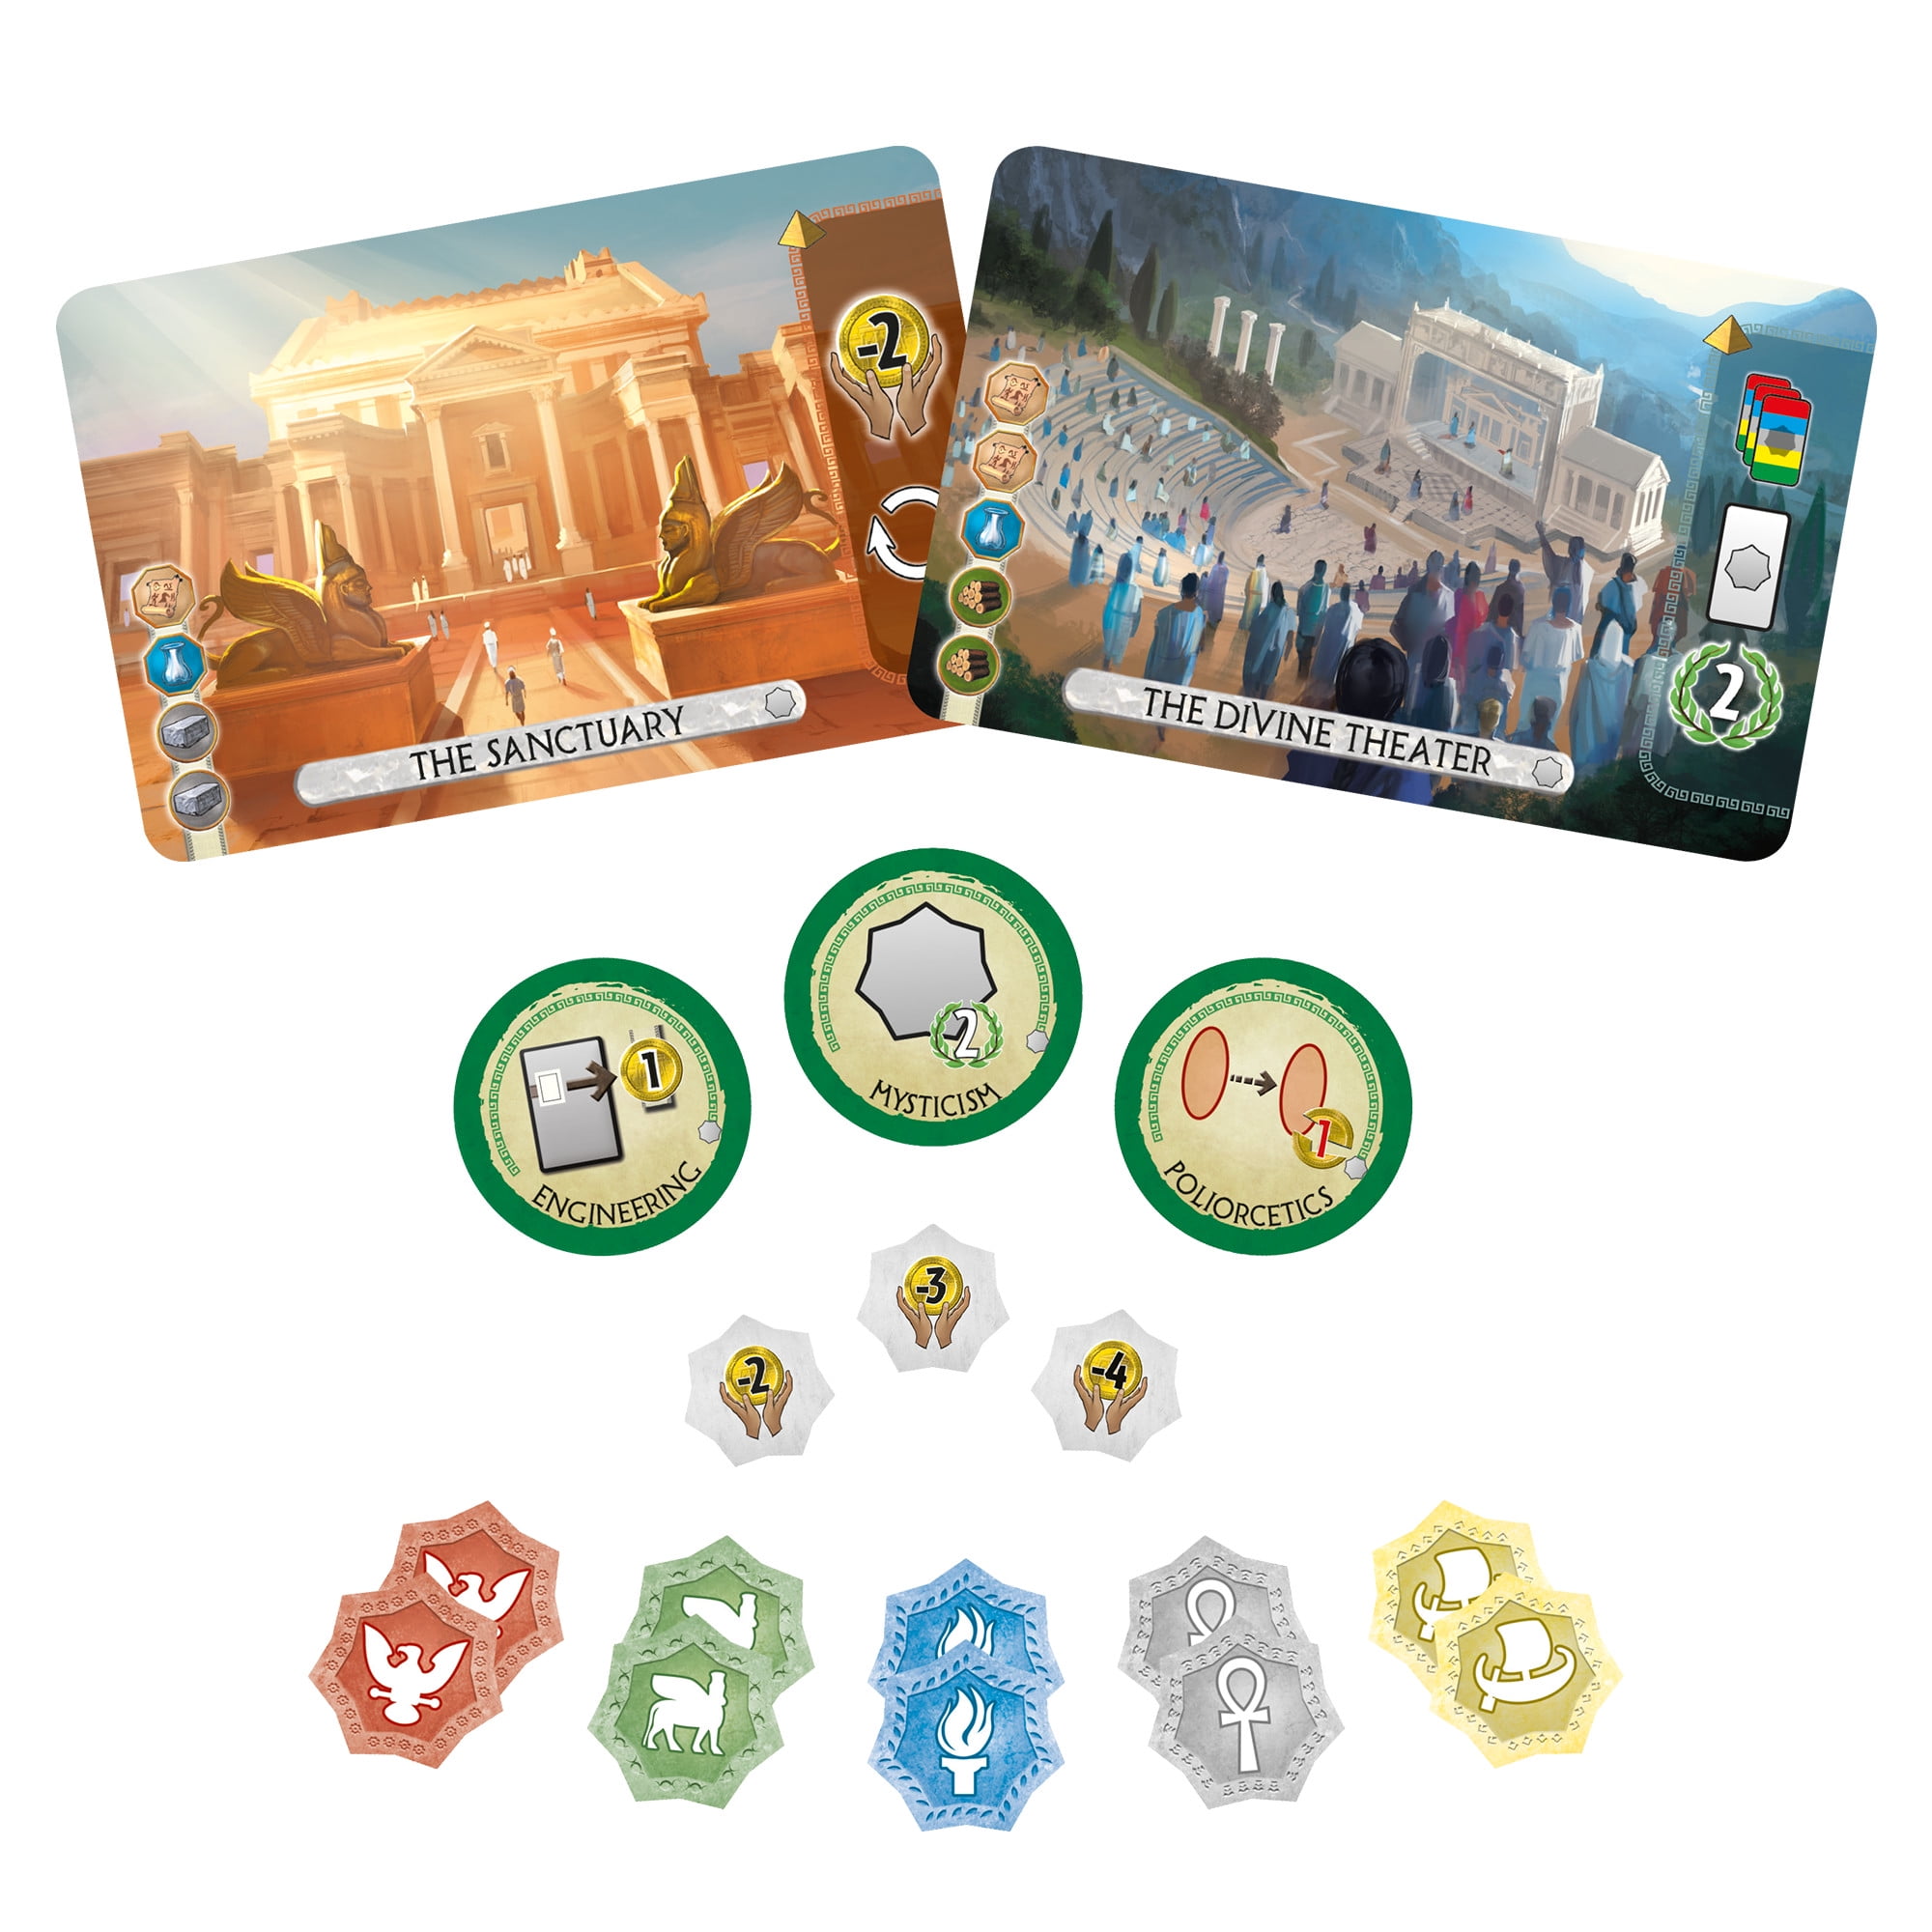 7 Wonders Duel Leaders Pantheon fans made expansion - Lucky Player shop